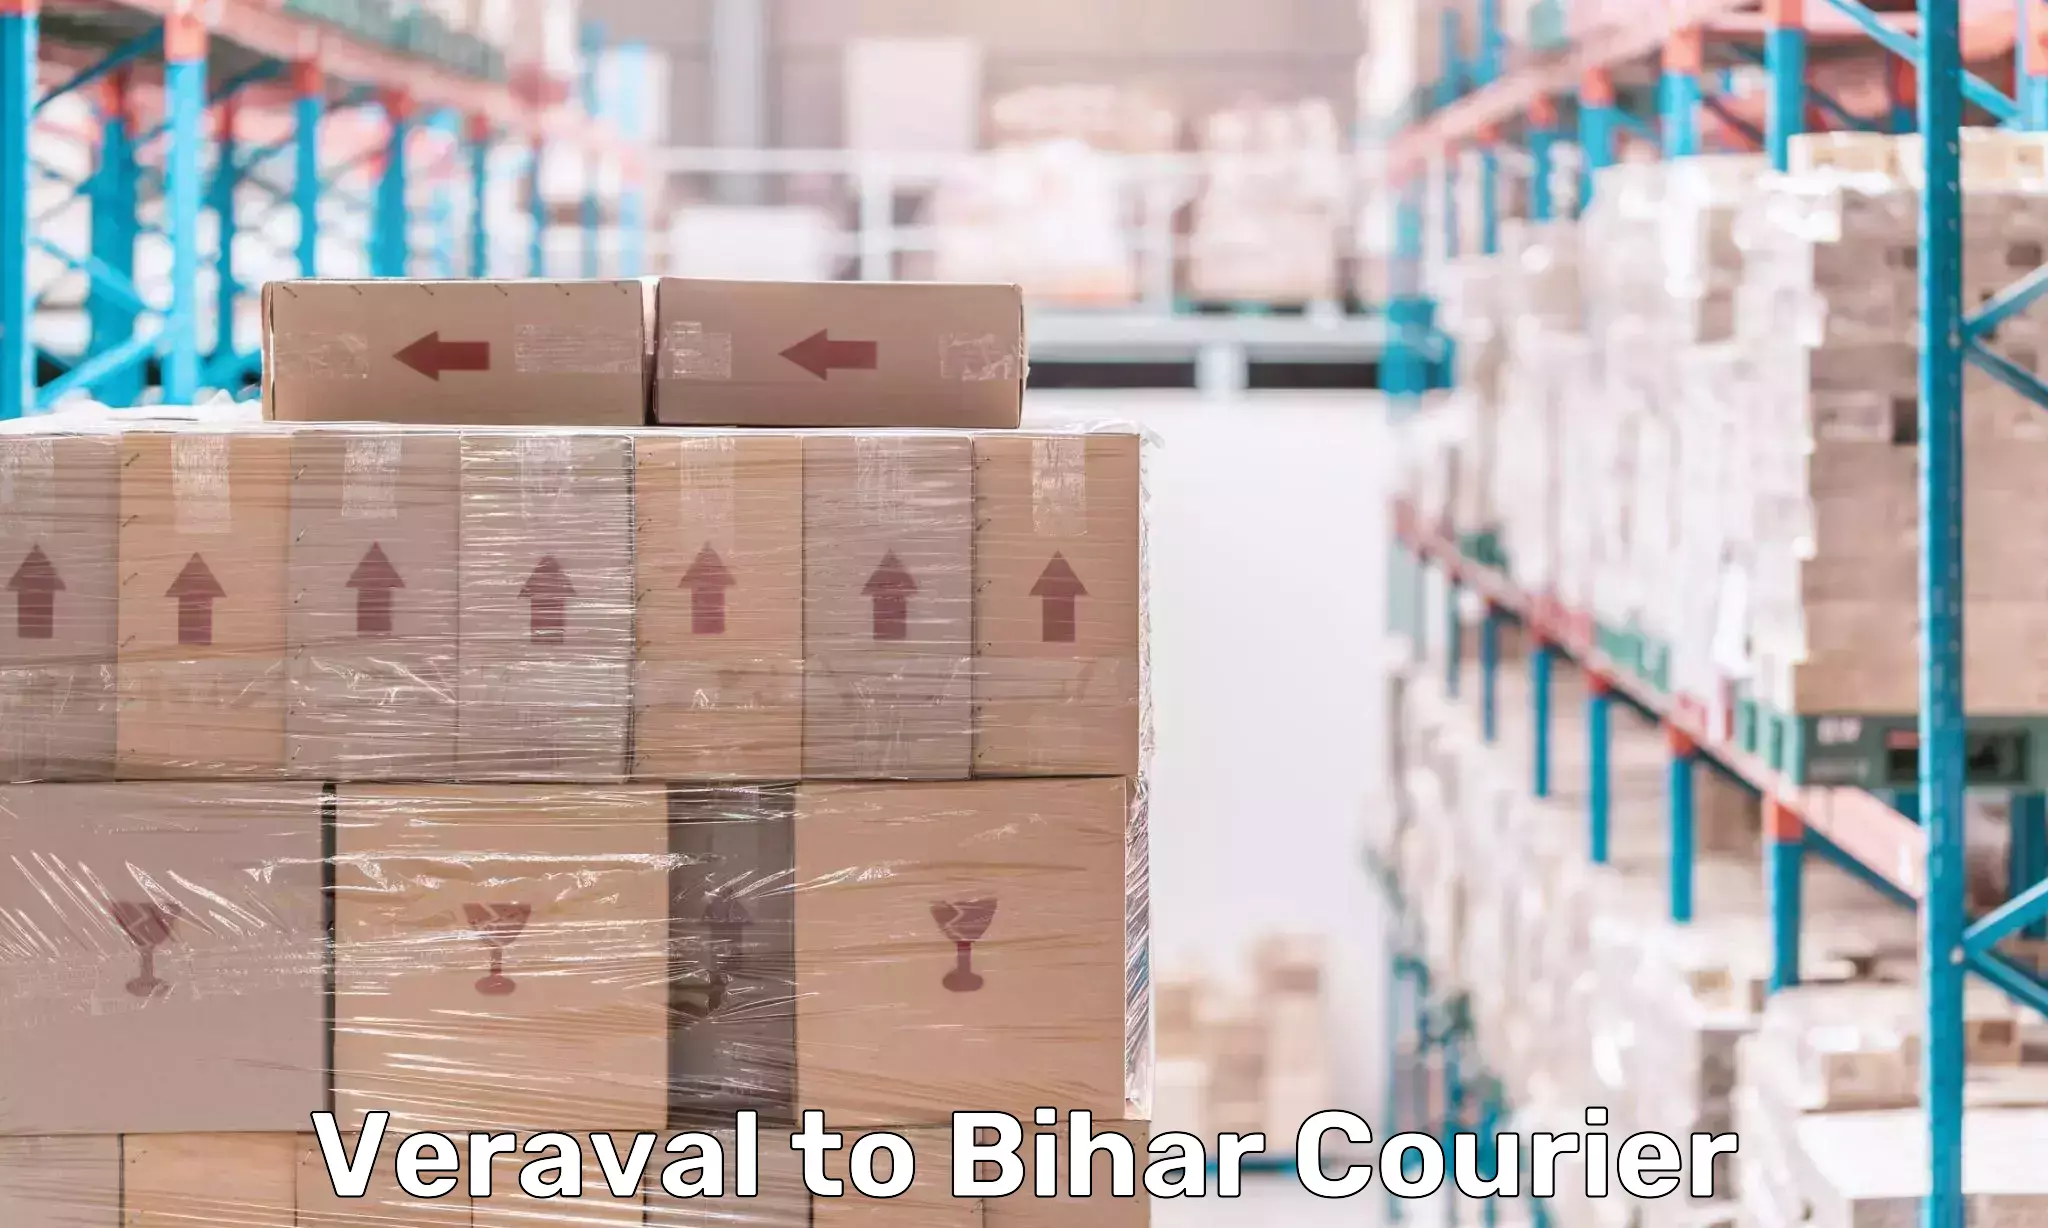 Express delivery capabilities Veraval to Bihar